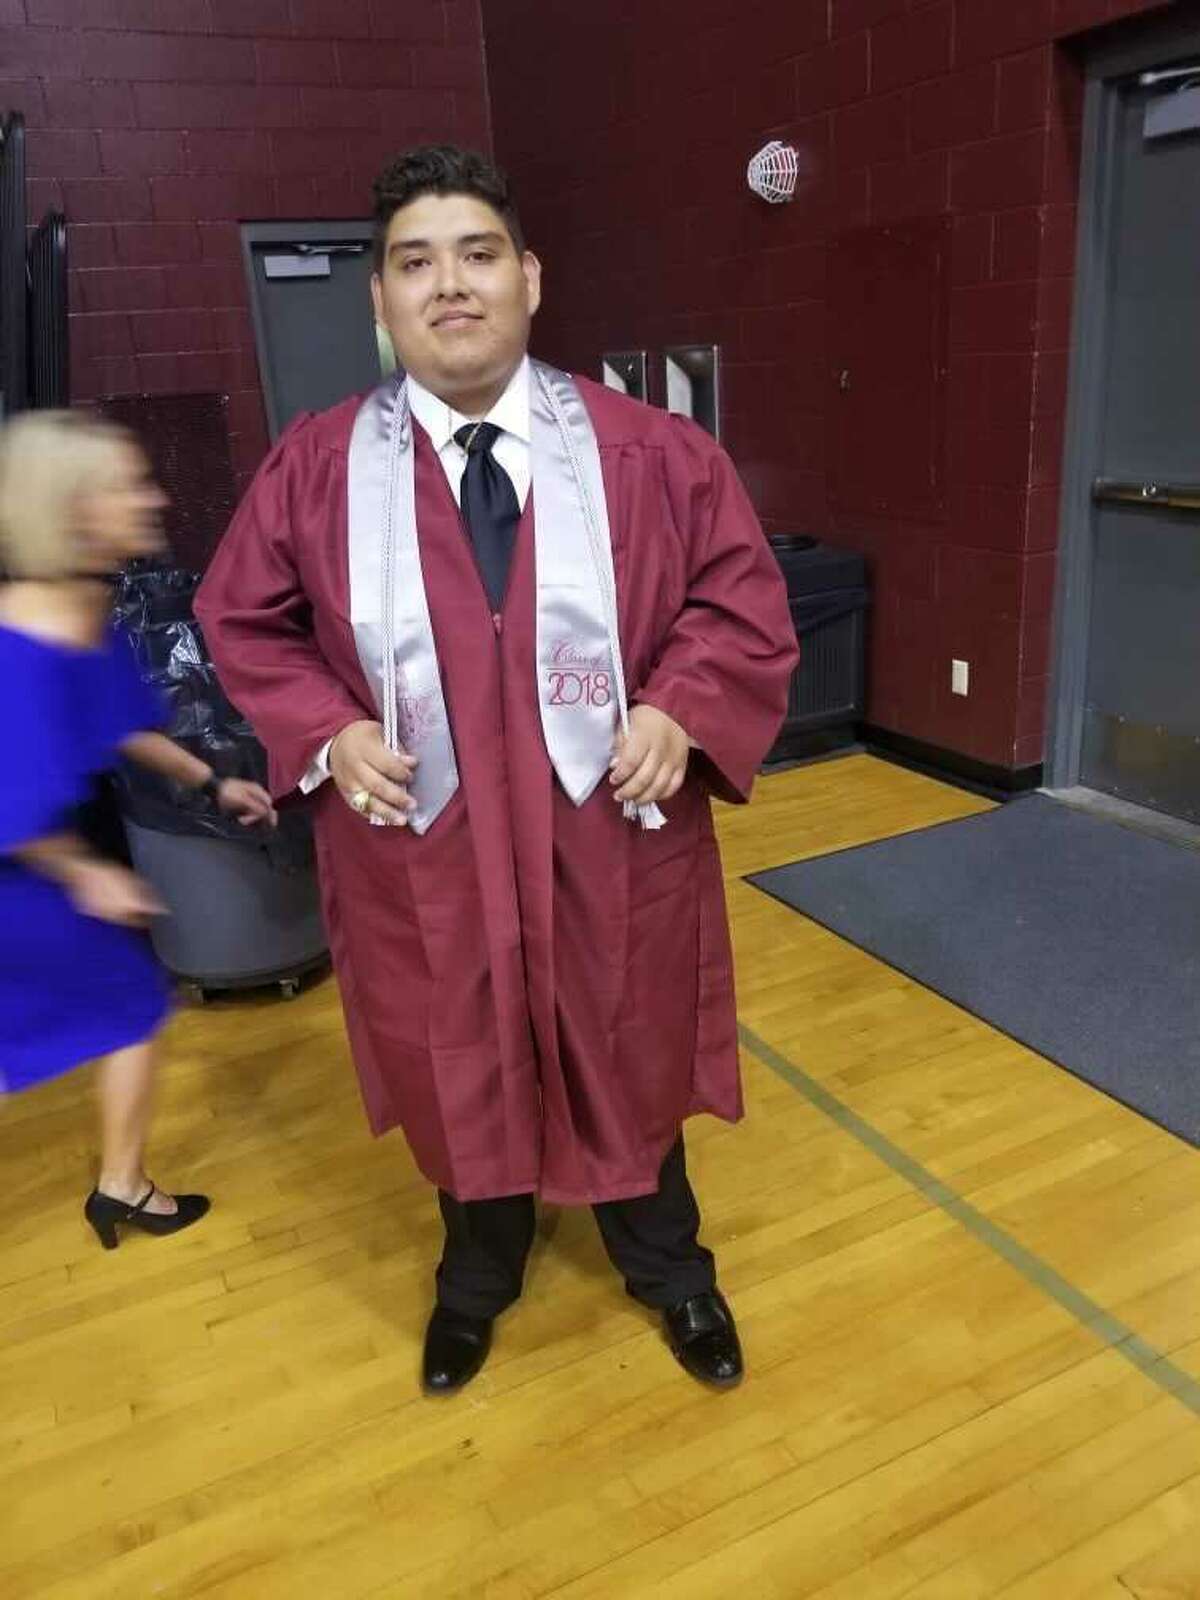 Axel Acosta, 21, of Washington, was a victim at Astroworld Festival.